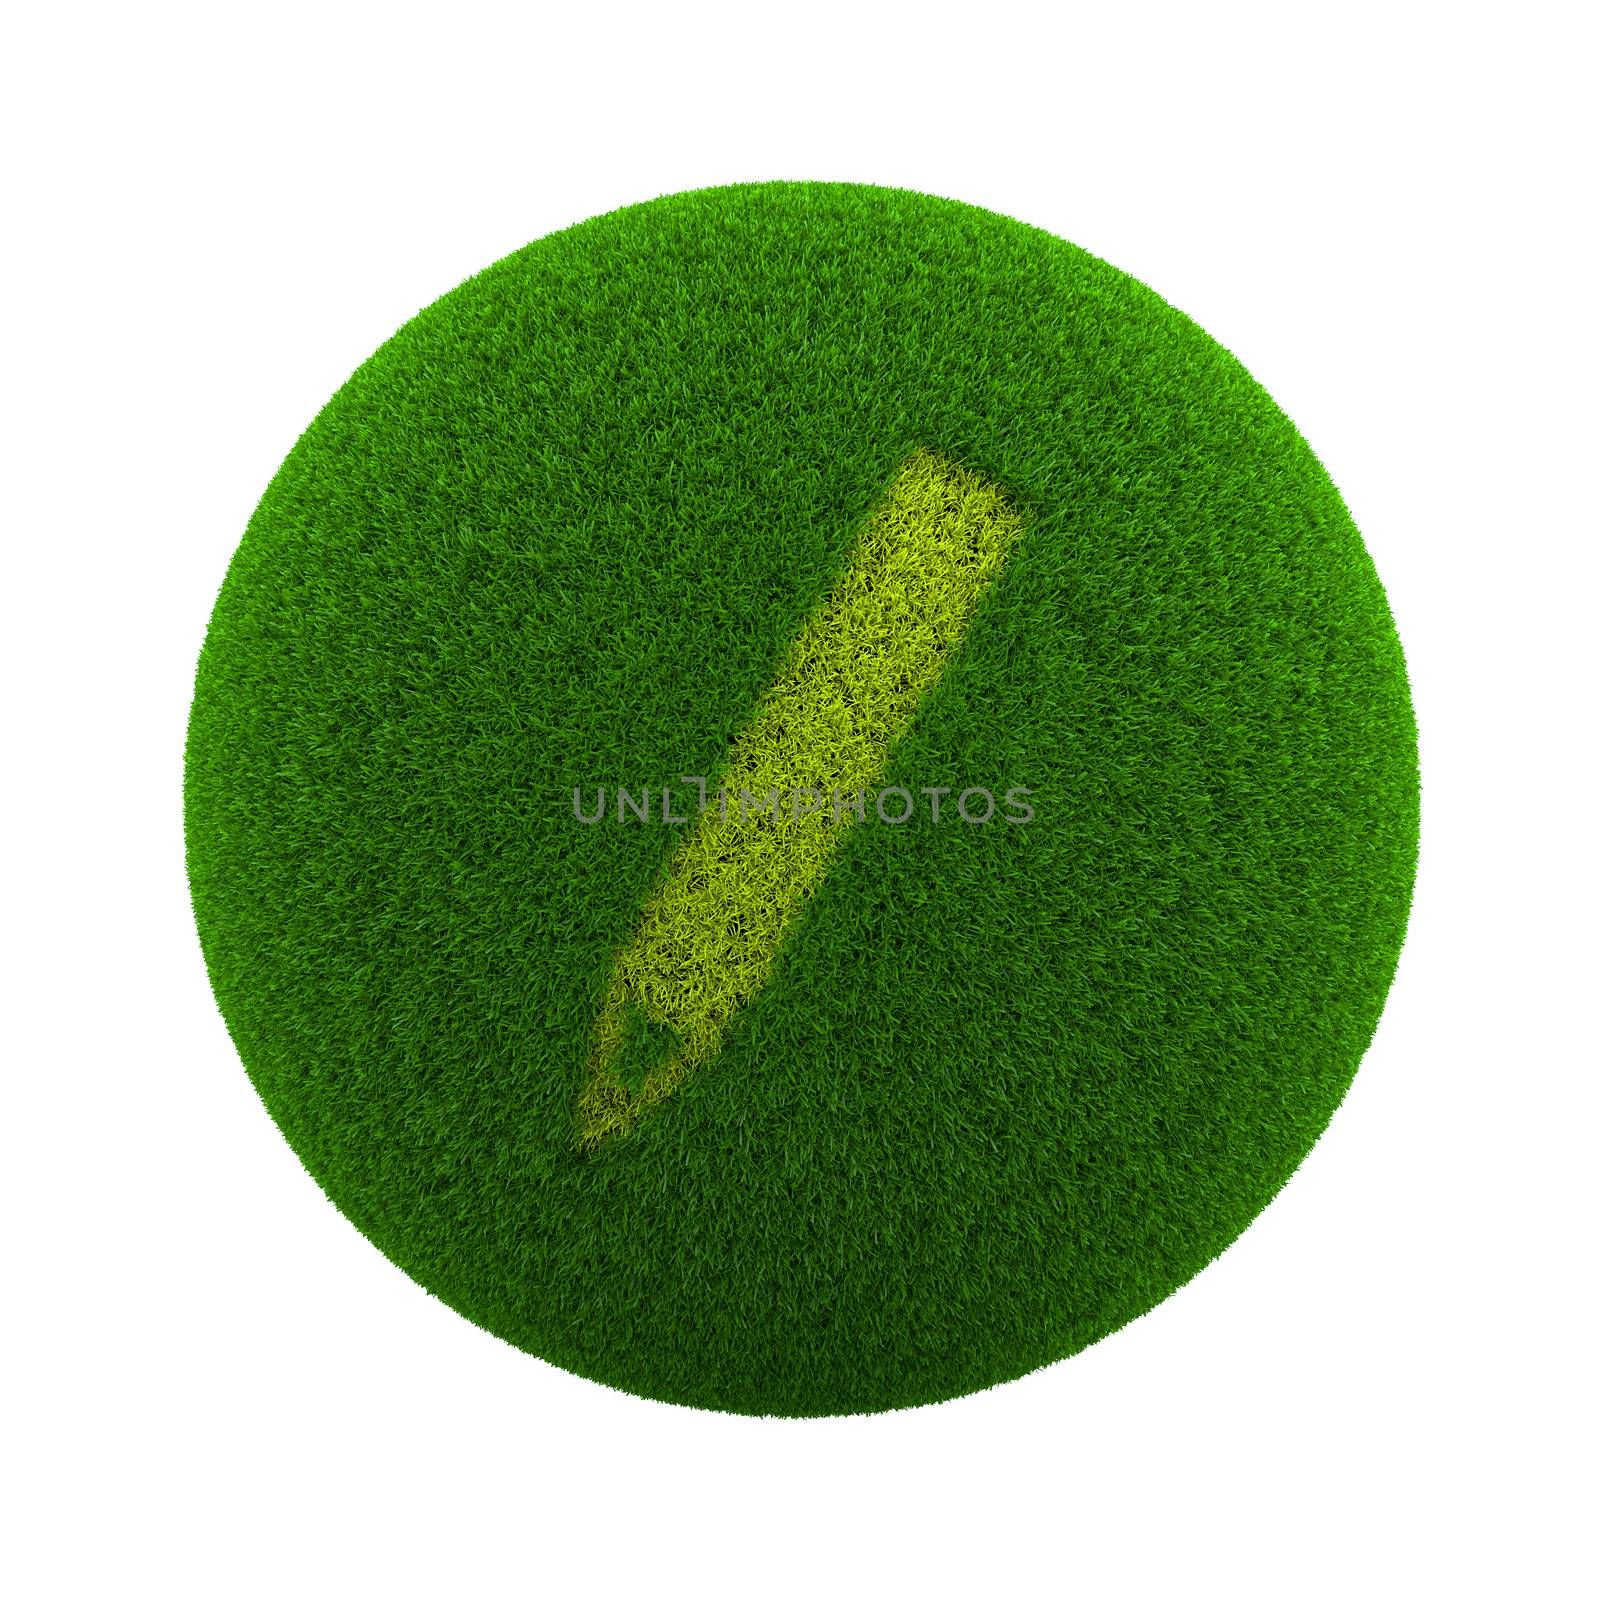 Green Globe with Grass Cutted in the Shape of a Pen Symbol 3D Illustration Isolated on White Background